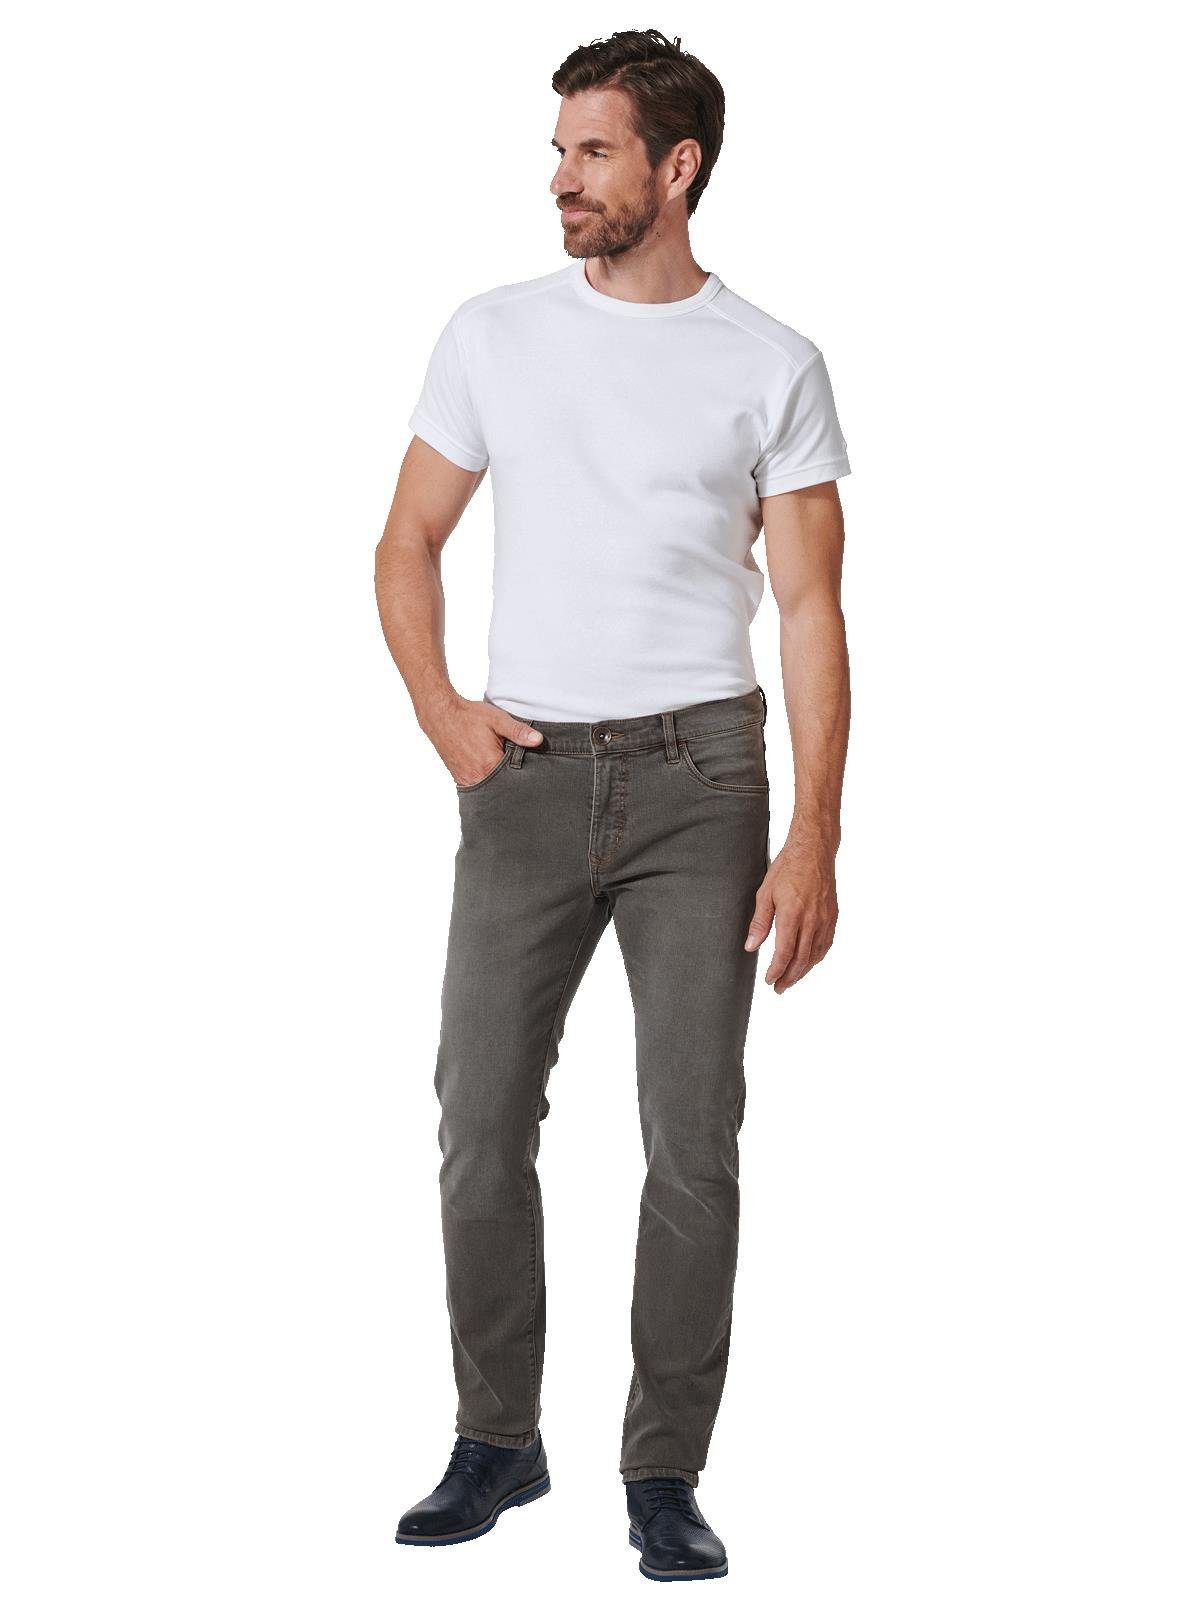 Jeans Stretch-Jeans Engbers regular